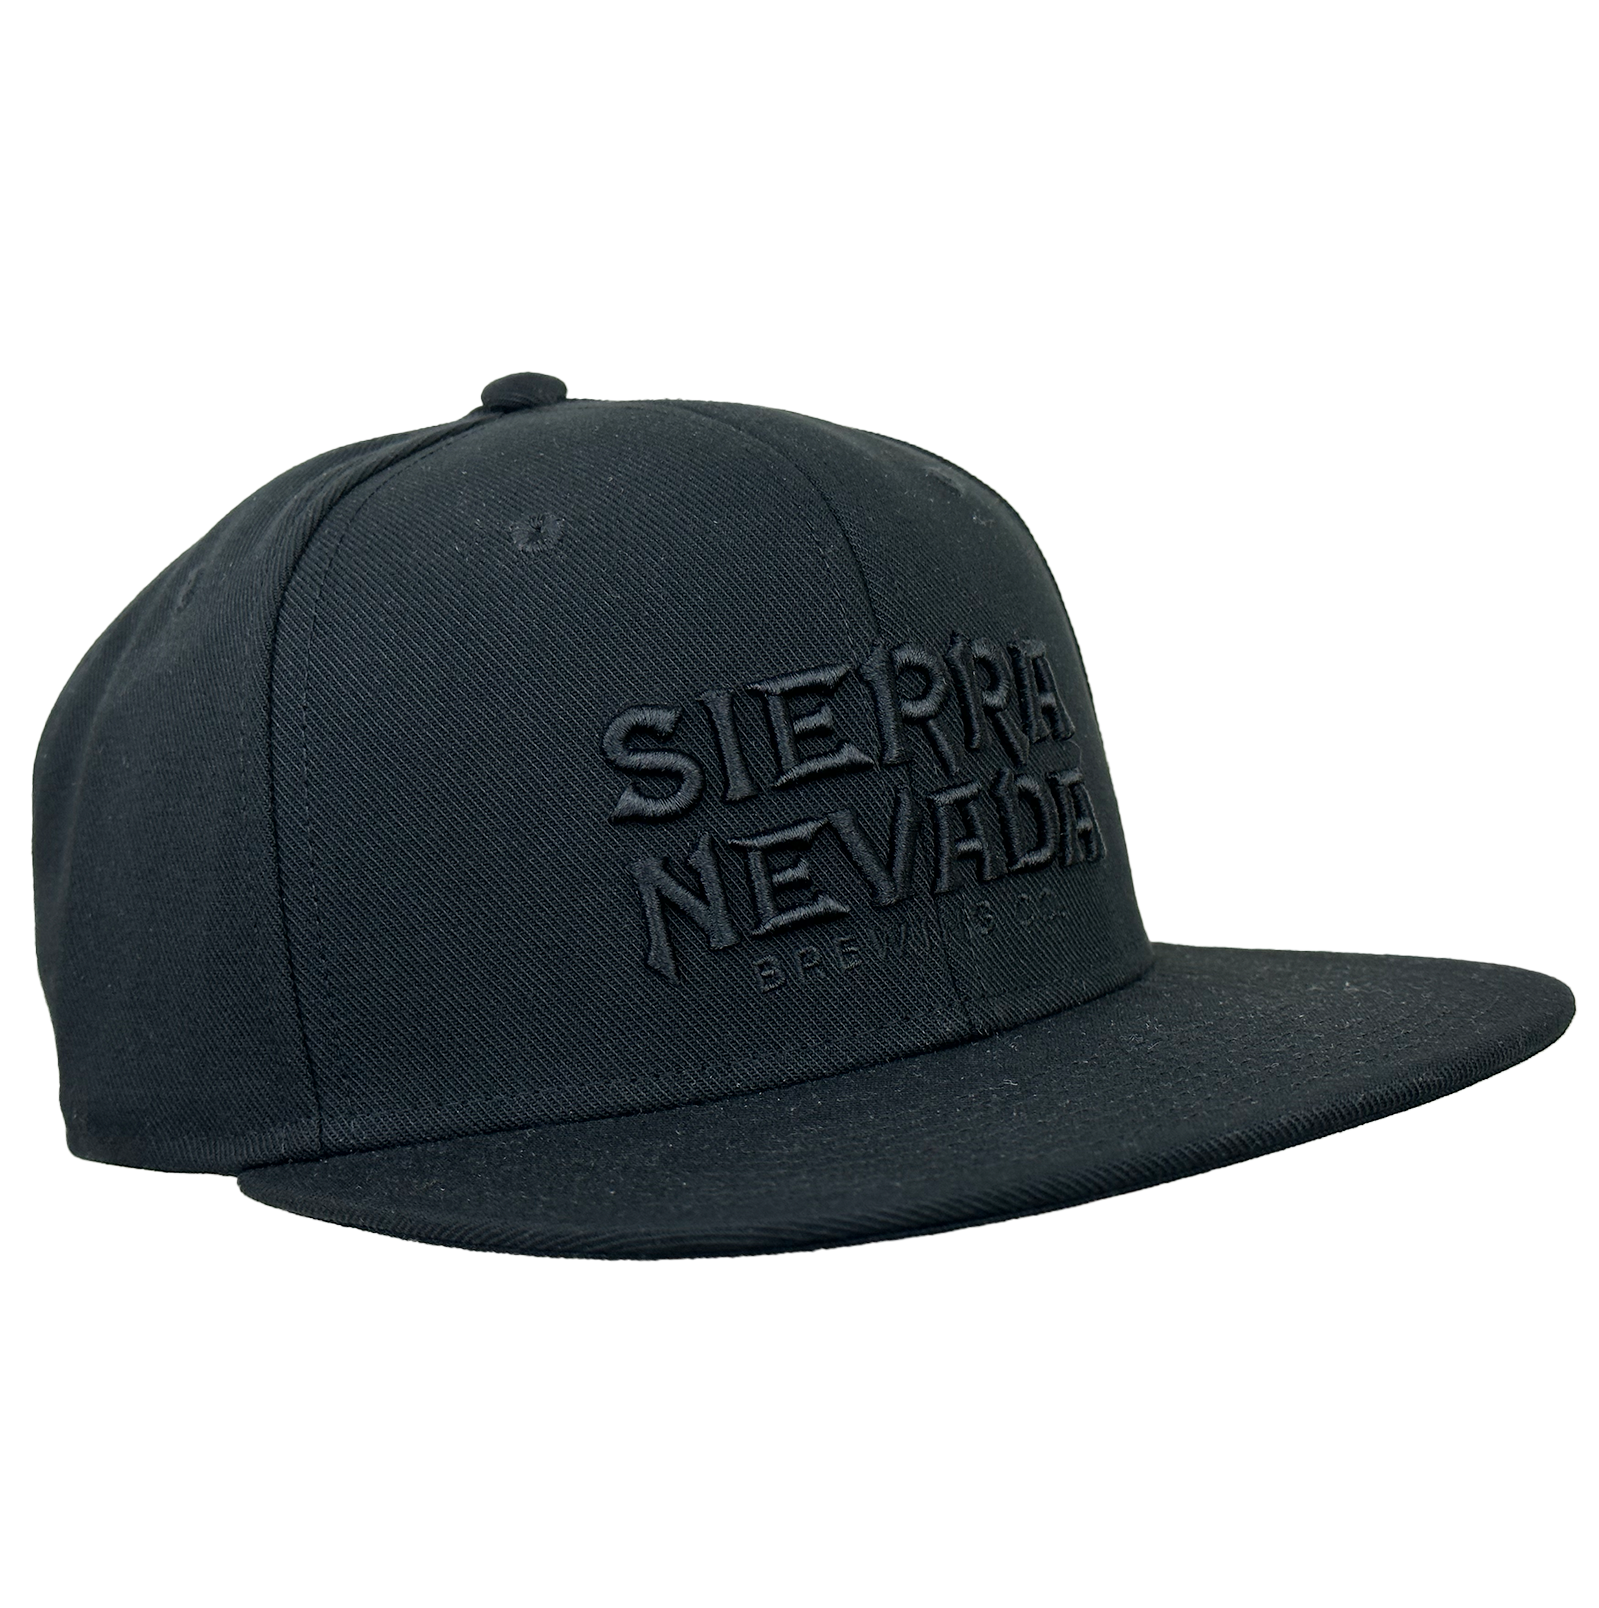 Sierra Nevada Stacked Text Hat in Black - front view featuring embroidered text